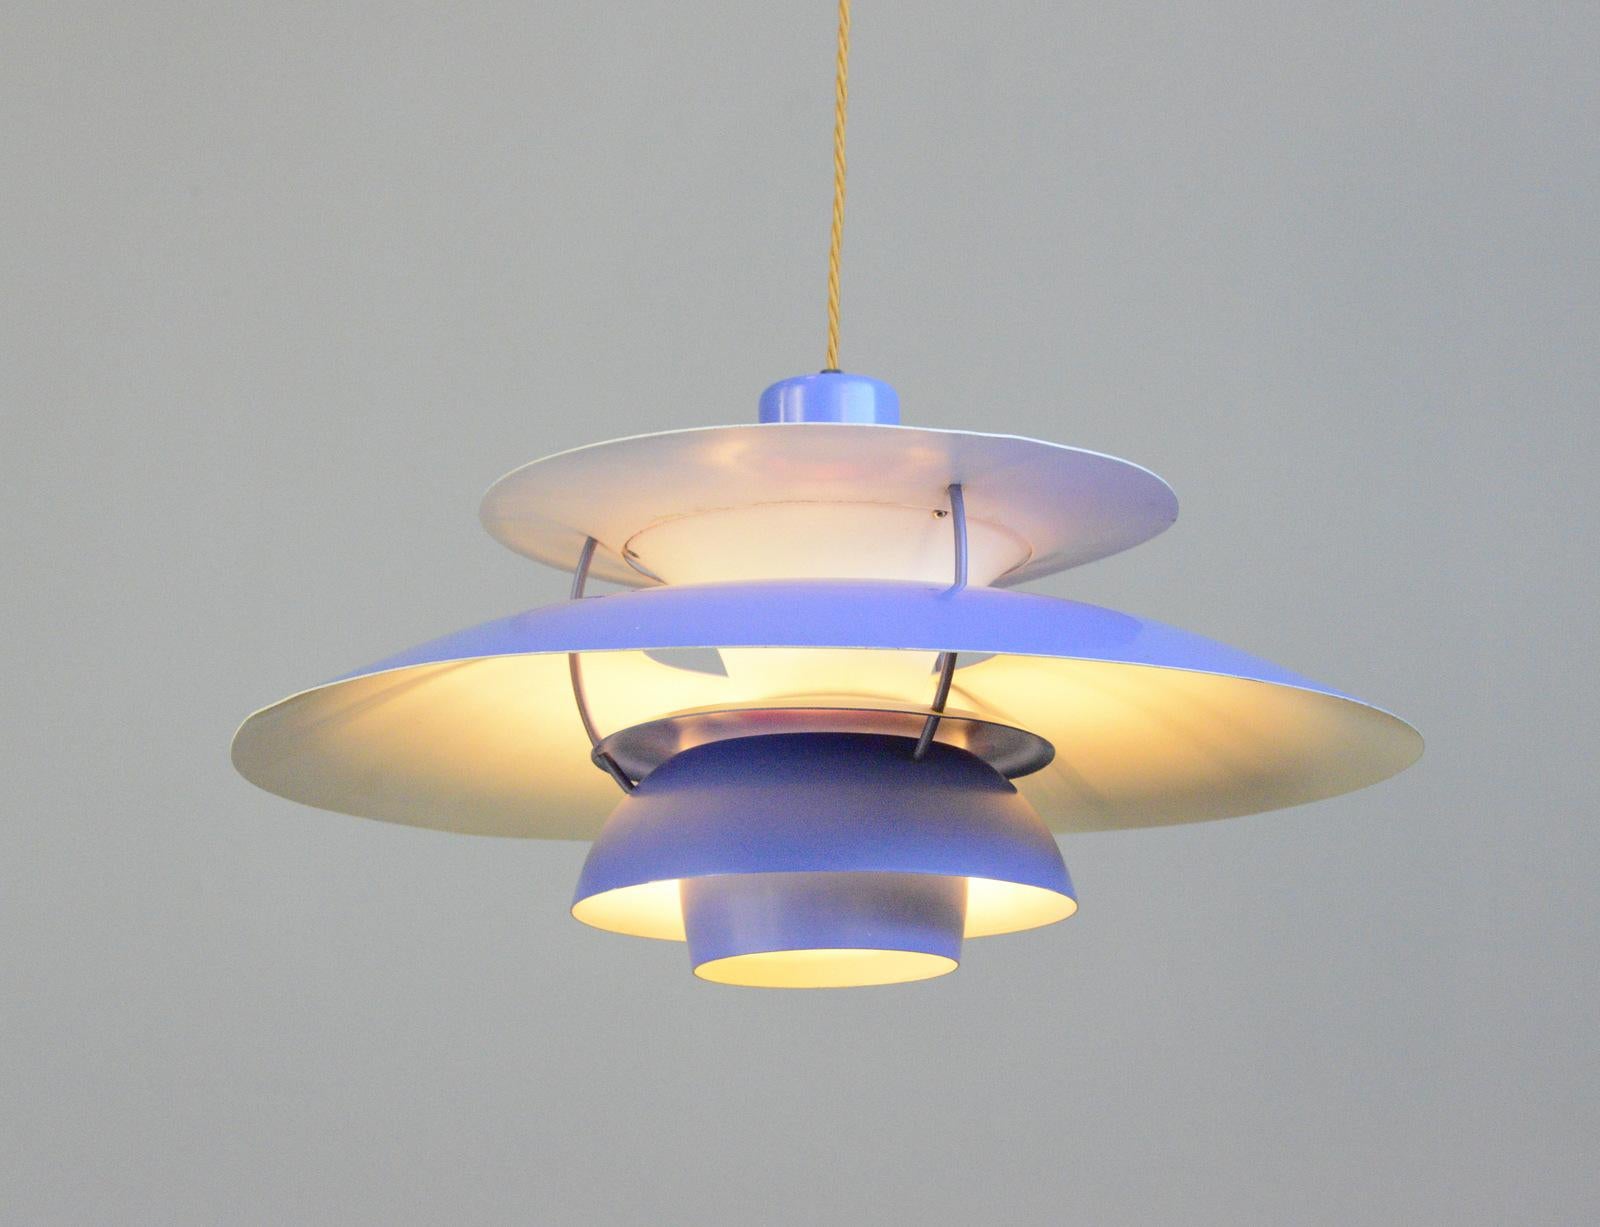 Blue Model PH5 pendant lights by Louis Poulson Circa 1960s

- Comes with 150cm of cable
- Takes E27 fitting bulbs
- Made from aluminium
- Designed by Poul Henningsen
- Made by Louis Poulson
- Model PH5
- Danish ~ 1960s
- 50cm wide x 26cm